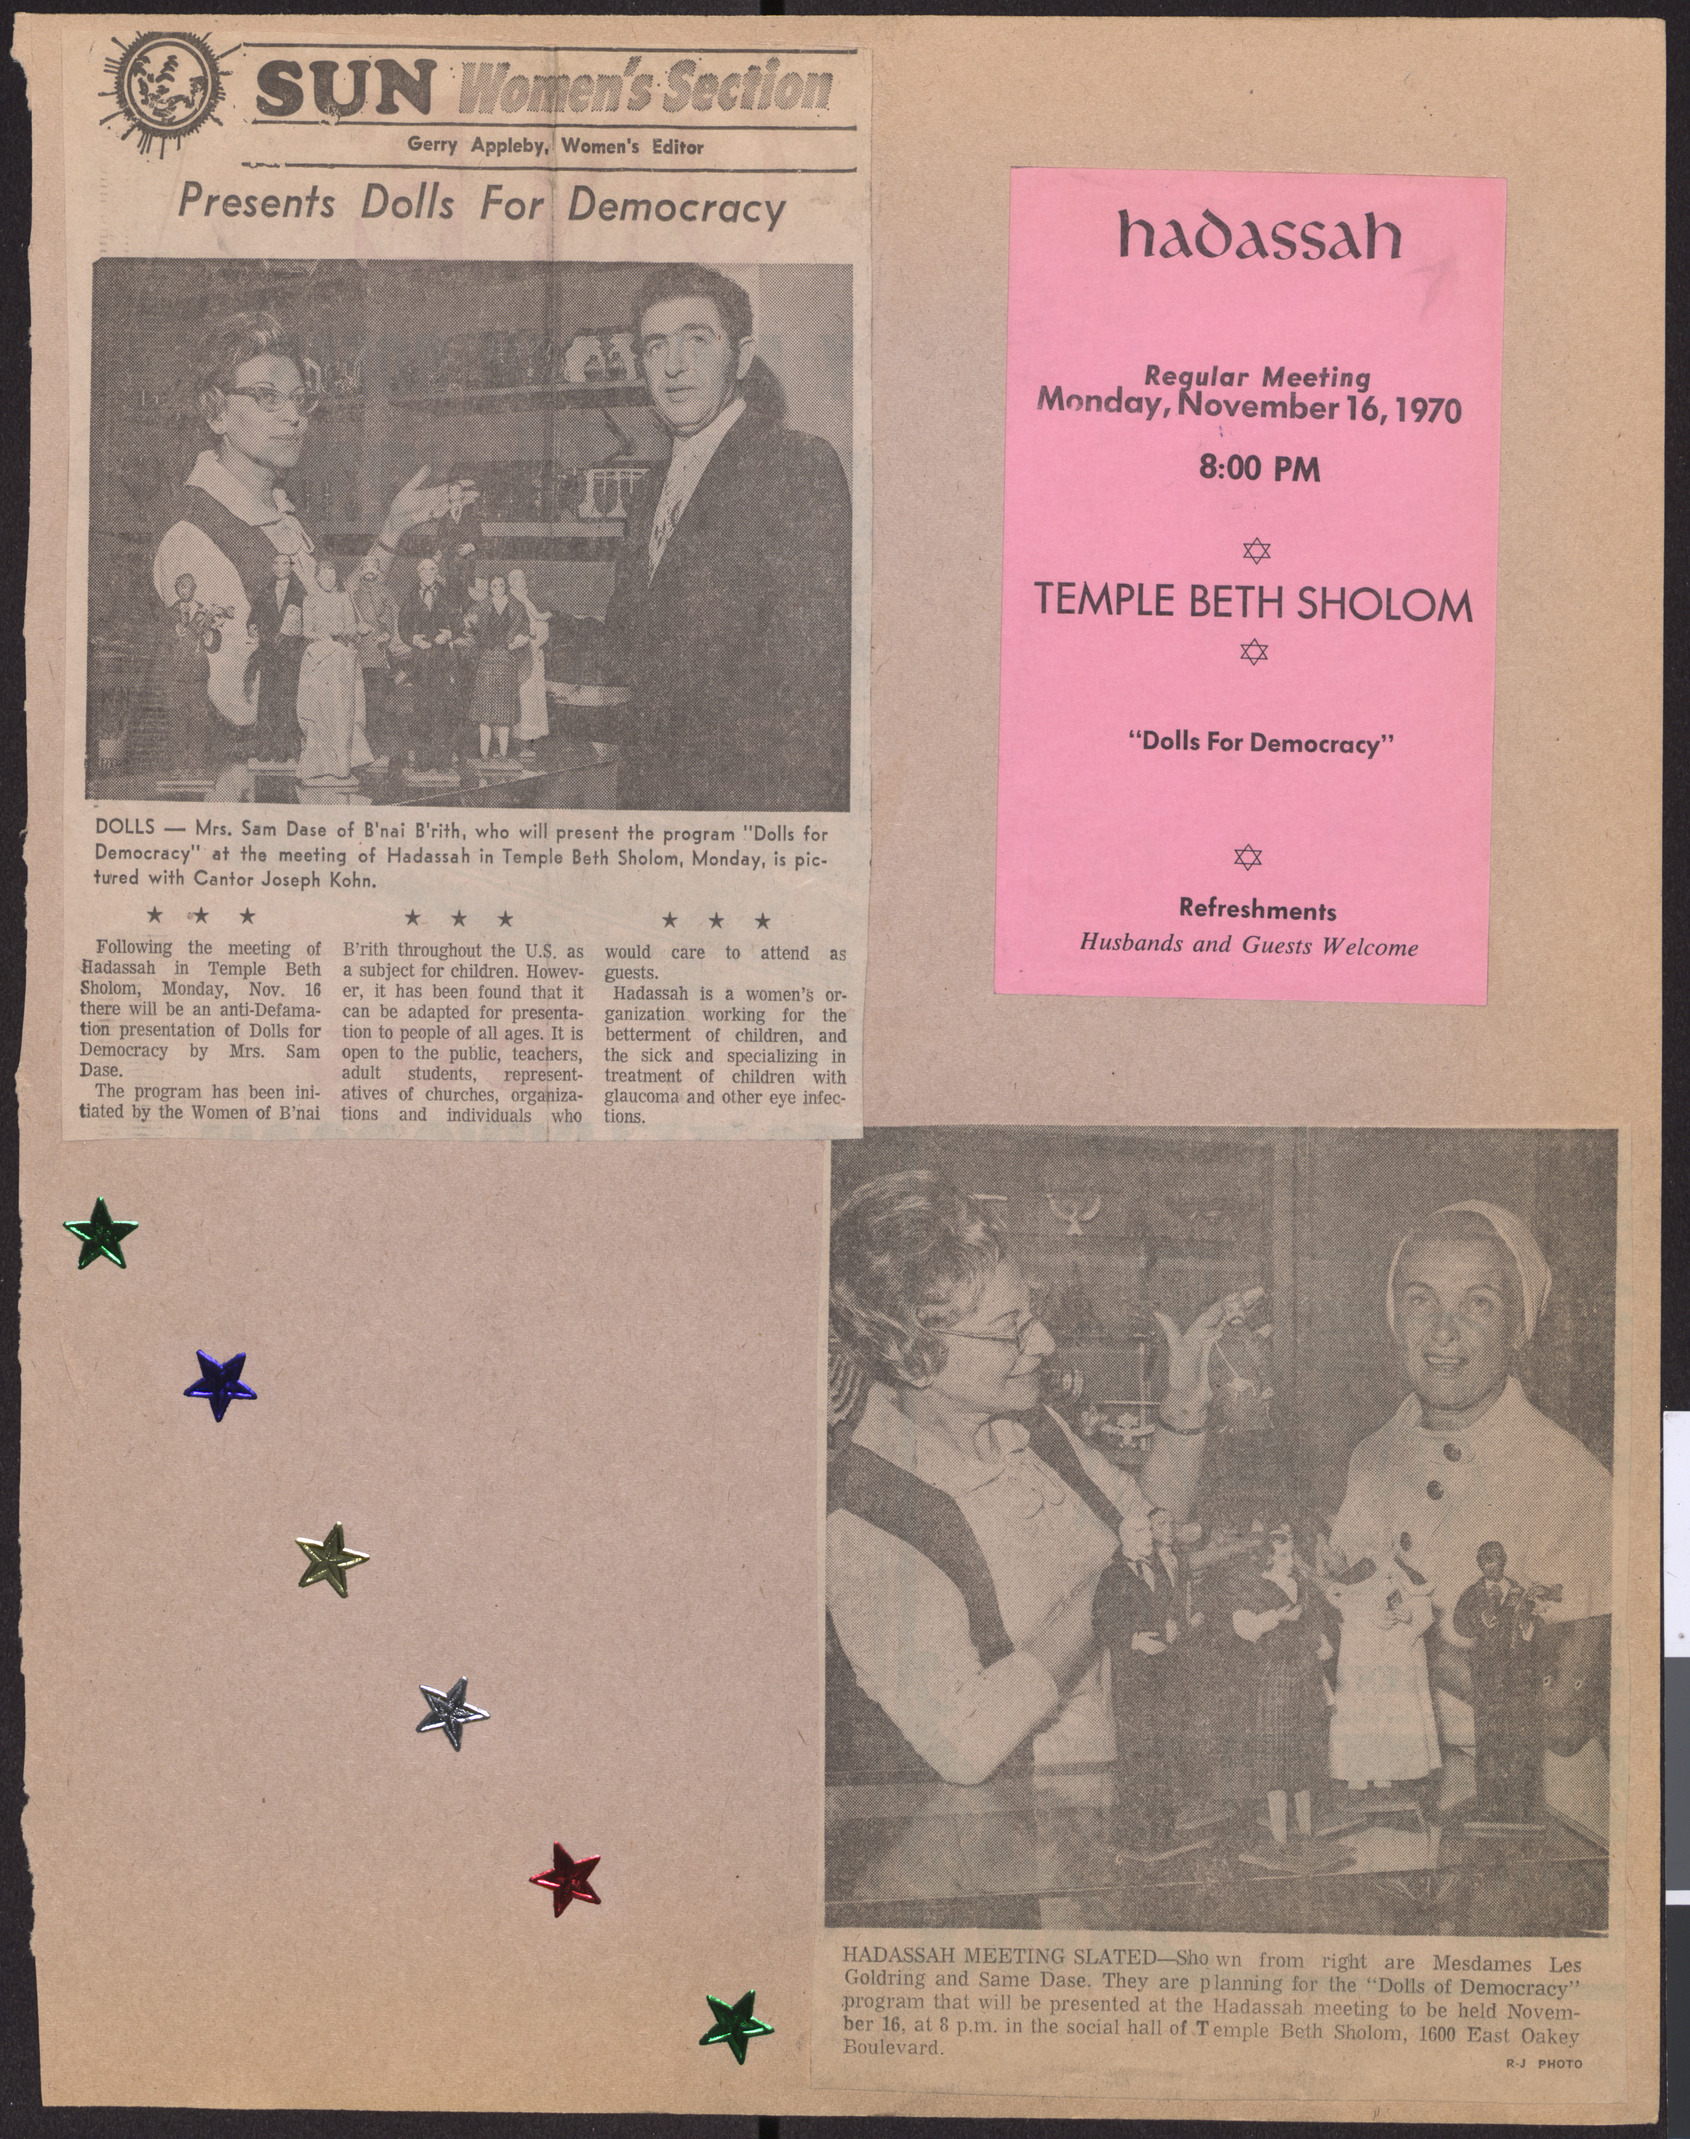 Newspaper clippings and meeting notice for Hadassah, November 1970